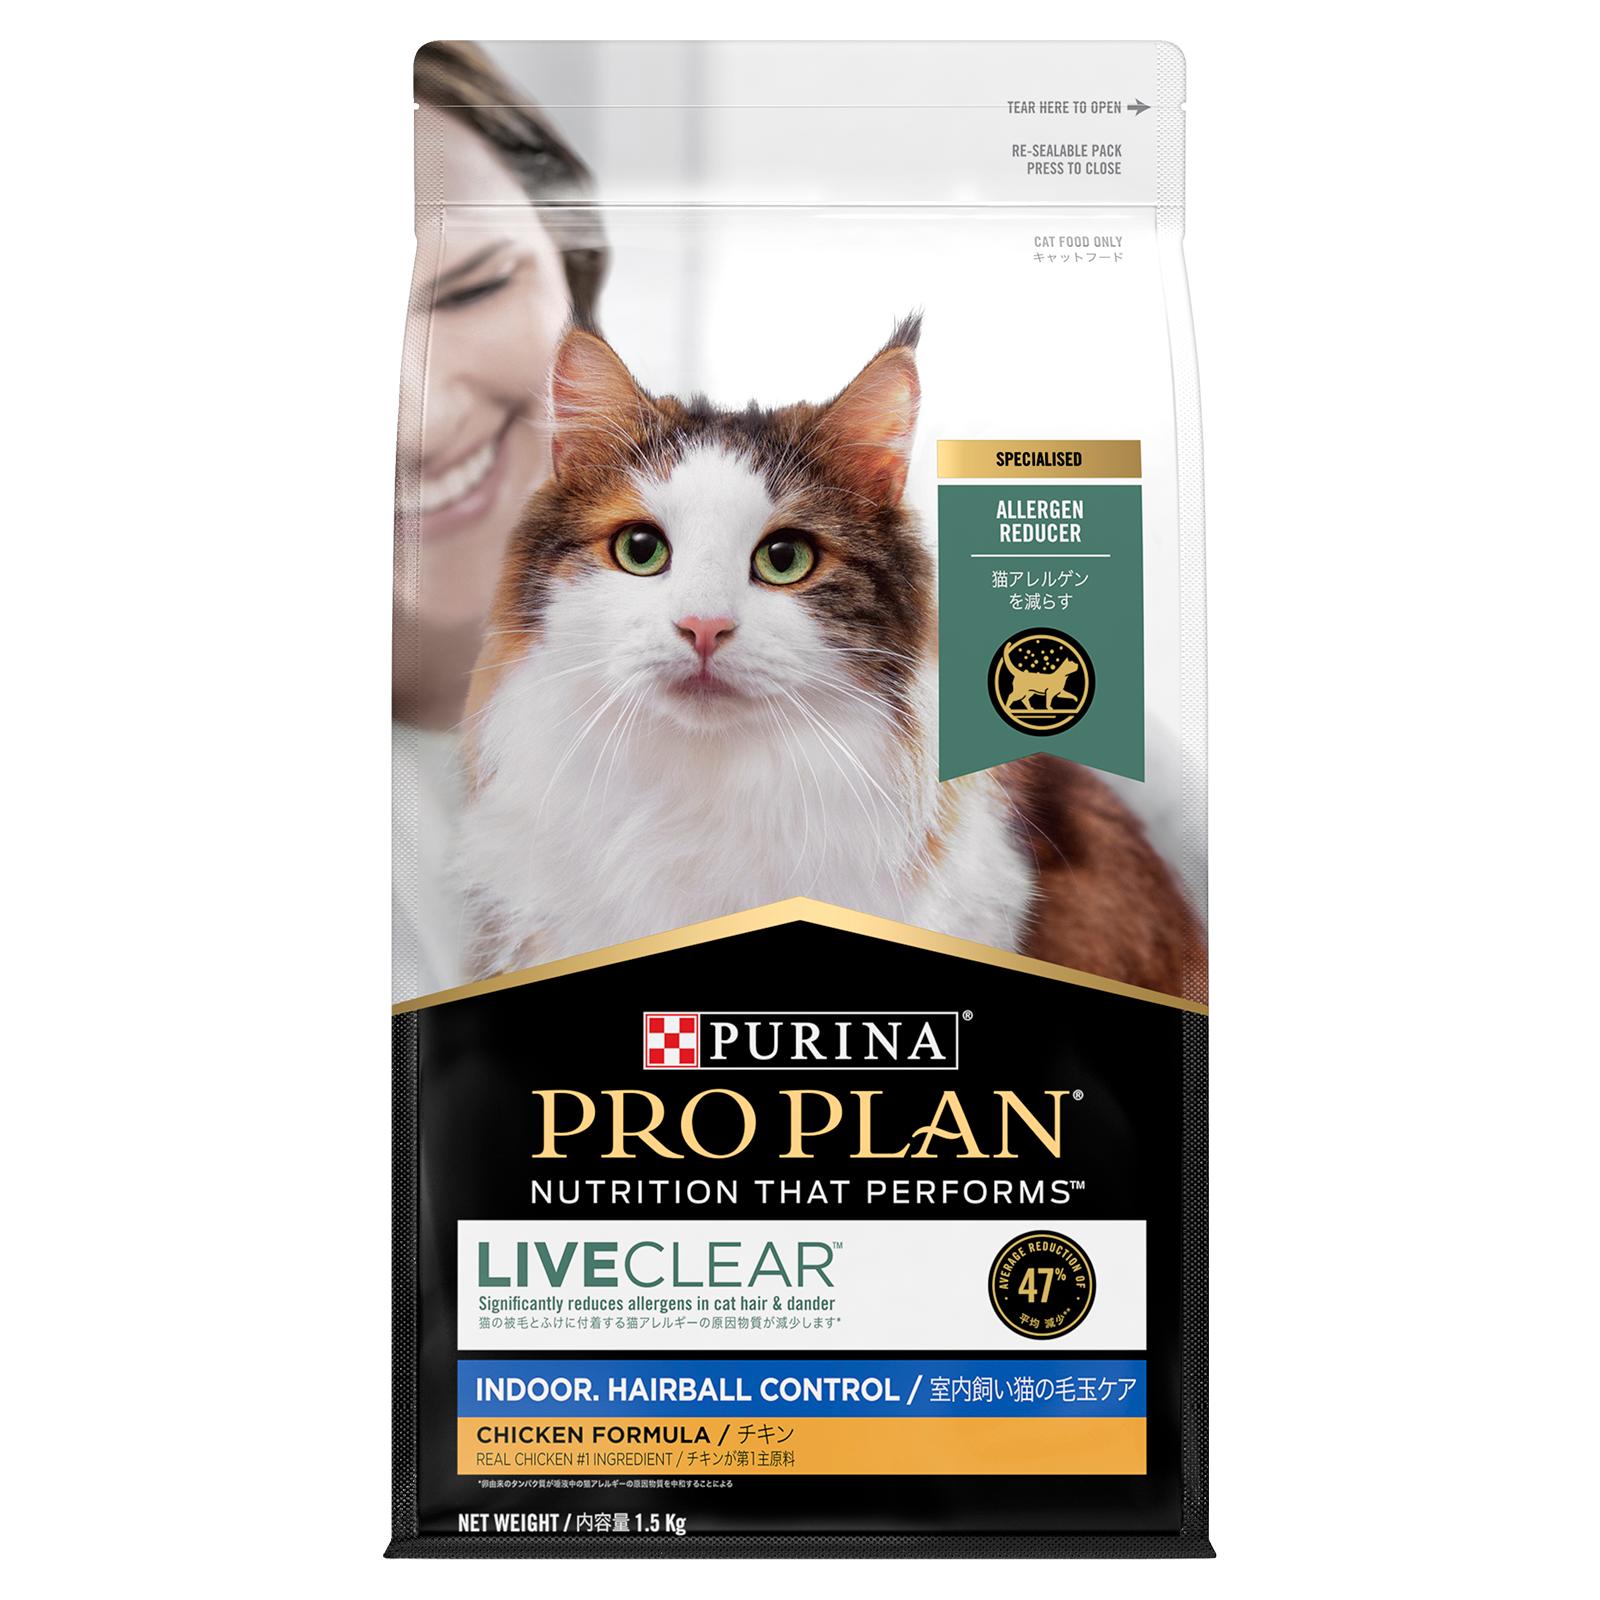 Pro Plan Cat Food LiveClear Adult Indoor & Hairball Control